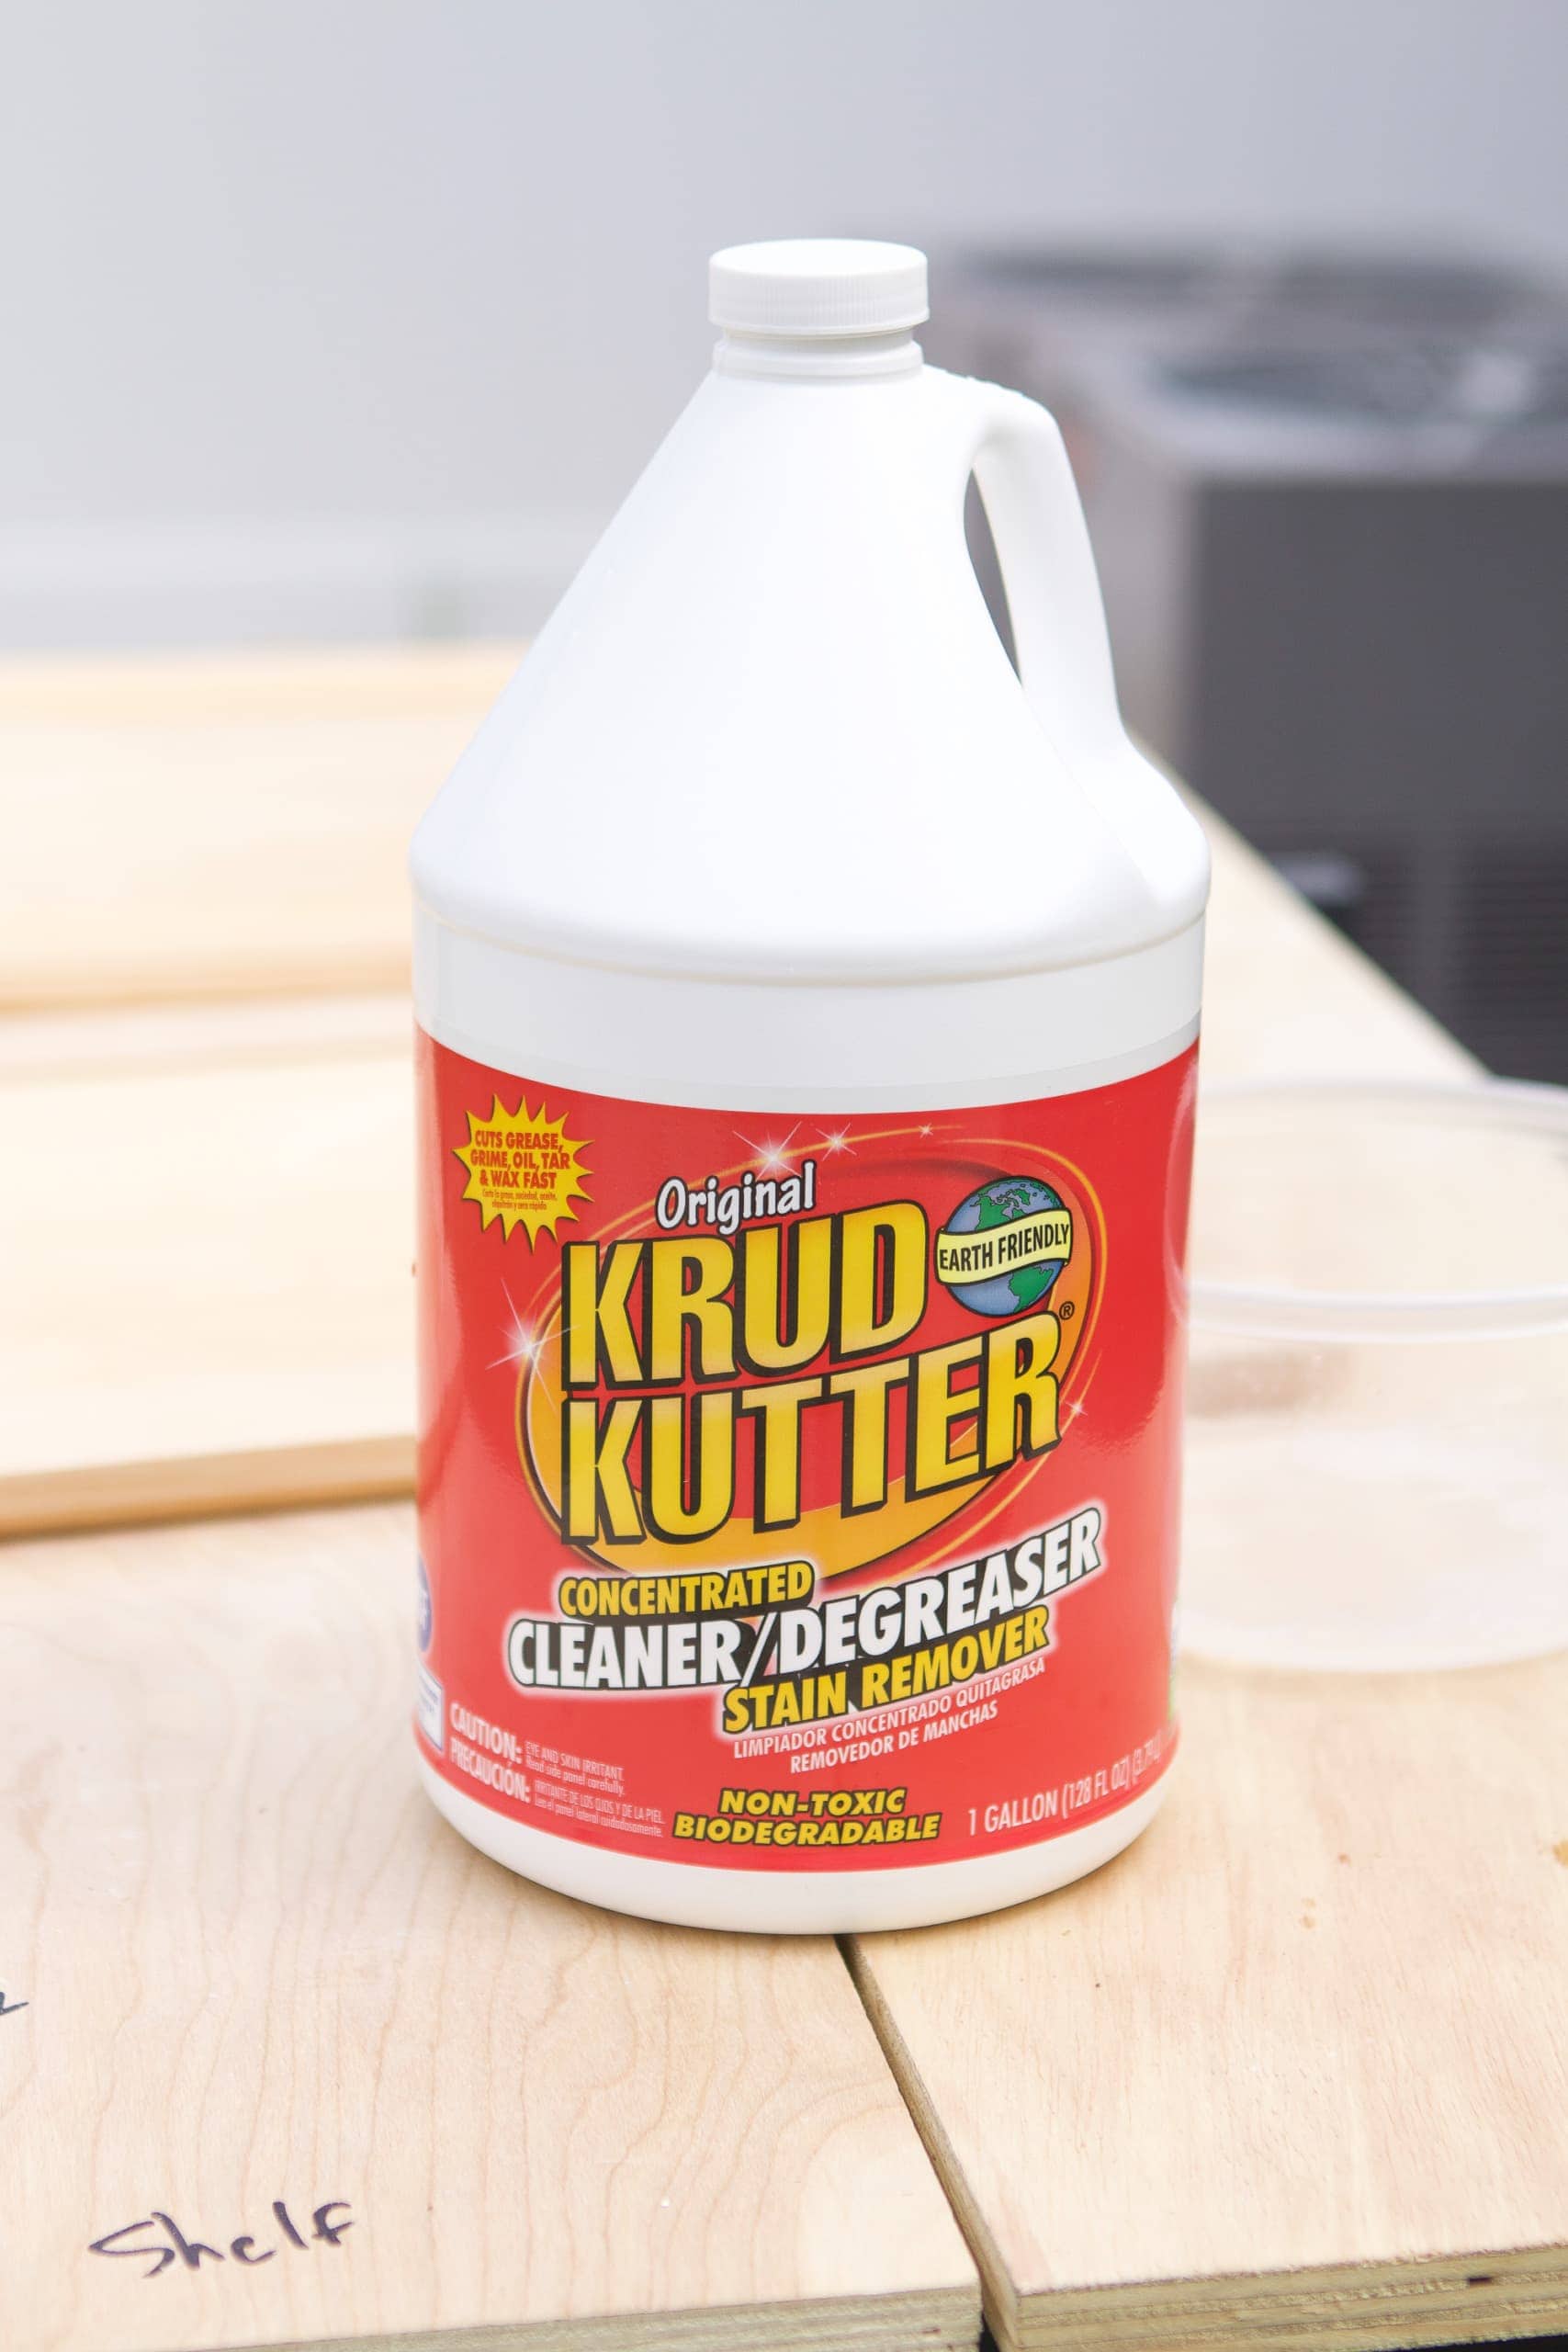 Krud kutter to clean the cabinets